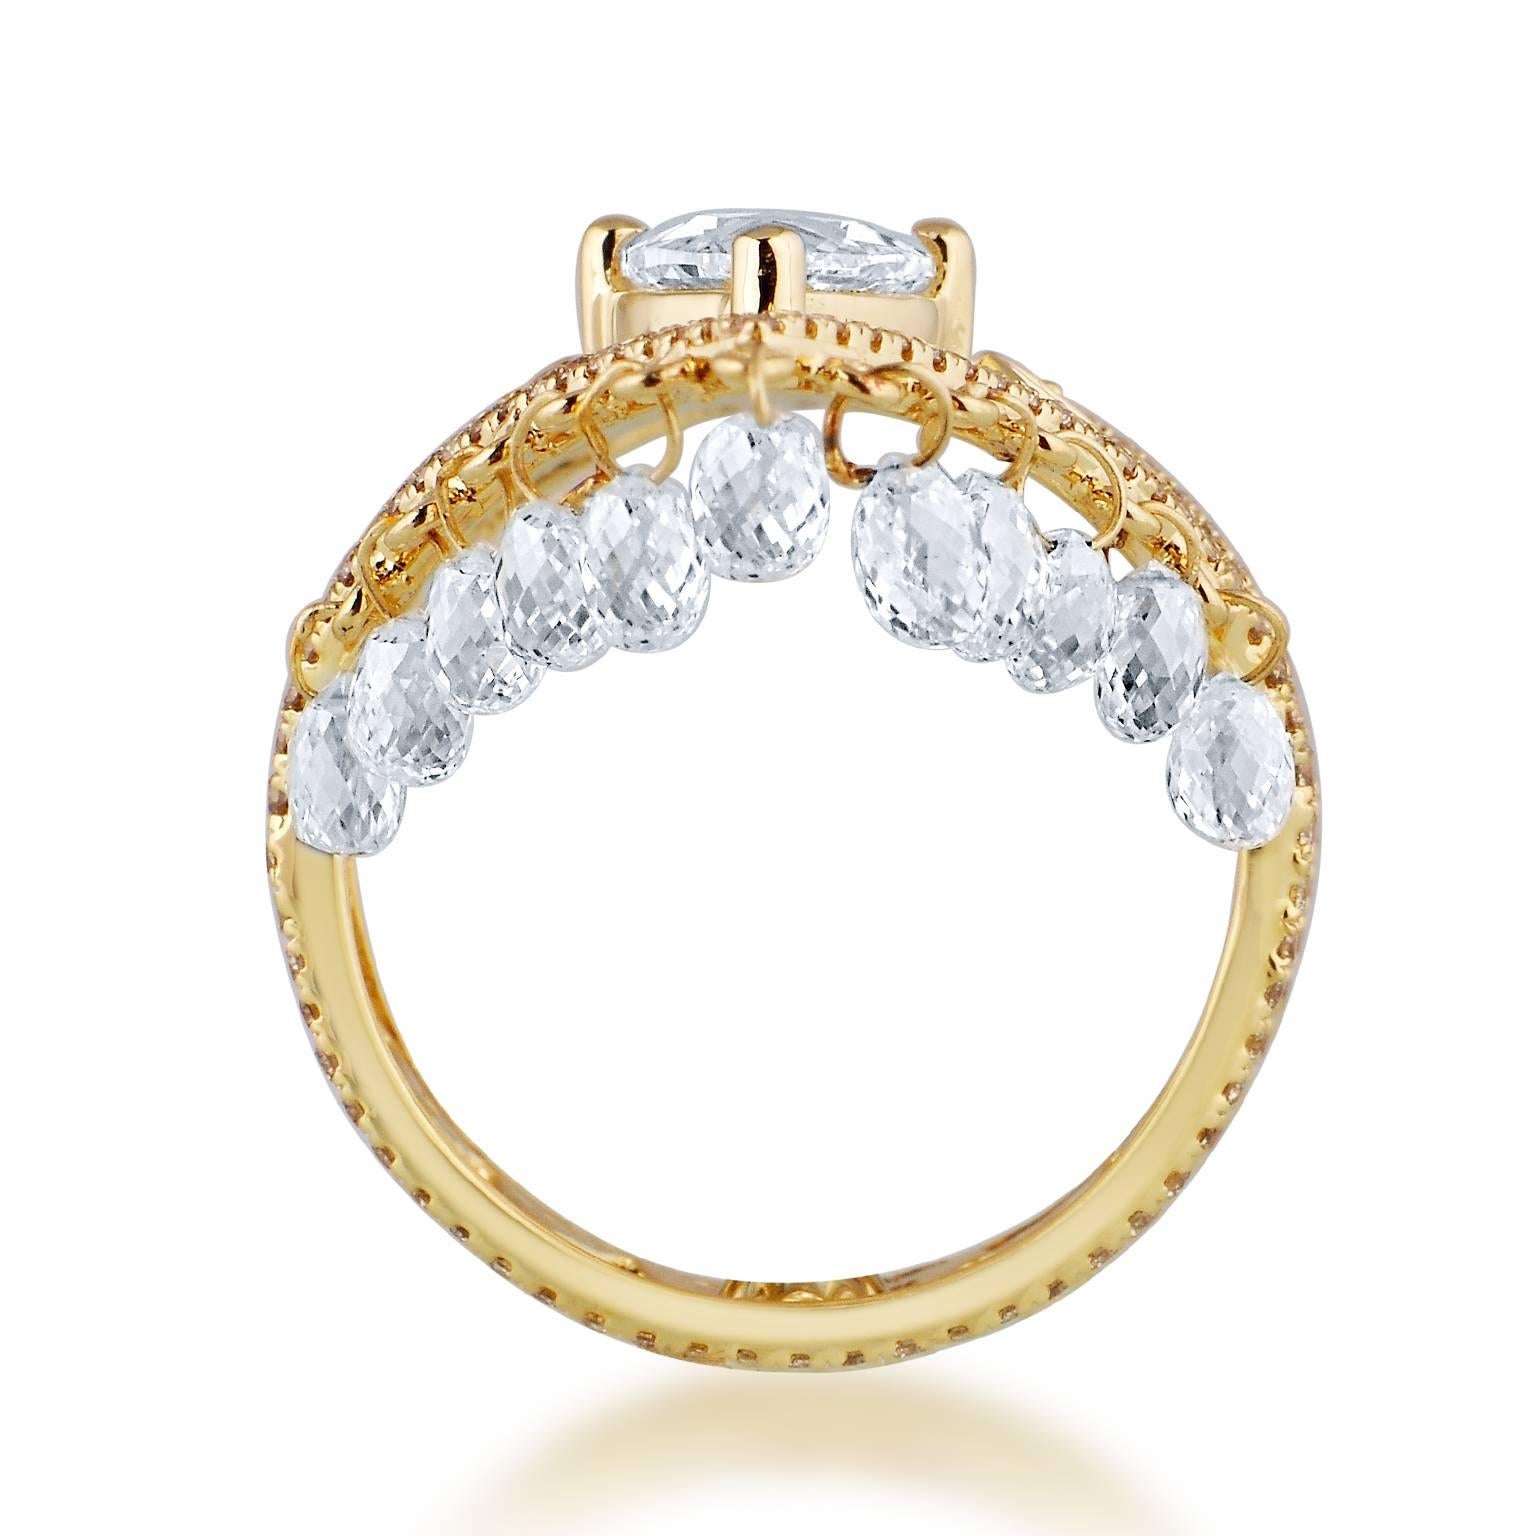 WHITE BRIOLETTE ROSE CUT AND PEAR ROSE CUT DIAMONDS WITH BROWN ROUND DIAMONDS AND WHITE ROUND DIAMONDS IN A KITE SHAPED RING
TOTAL CARAT WEIGHT 3.14 CTW
DIAMOND QUALITY SI1
18KT YELLOW GOLD
SIZES AVAILABLE M/N (US6.25)
Made in India